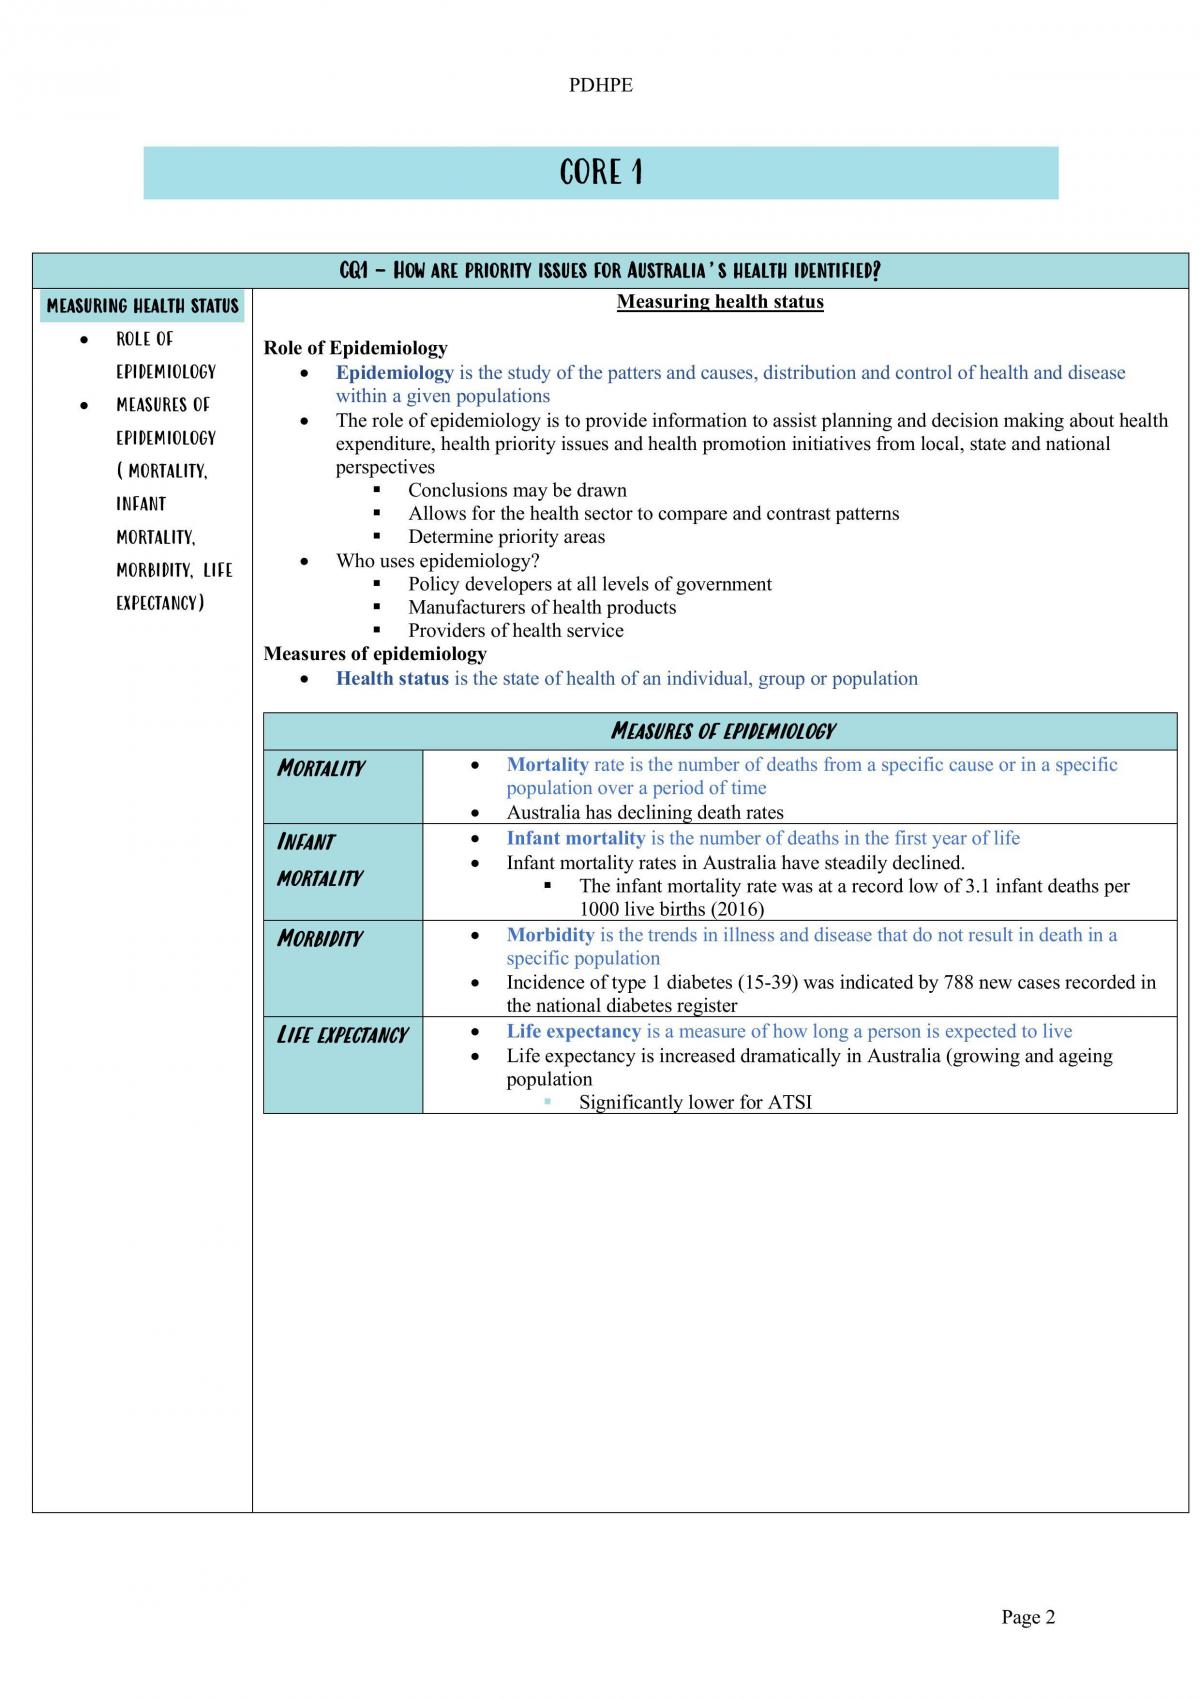 PDHPE Concise Syllabus Notes - Page 2